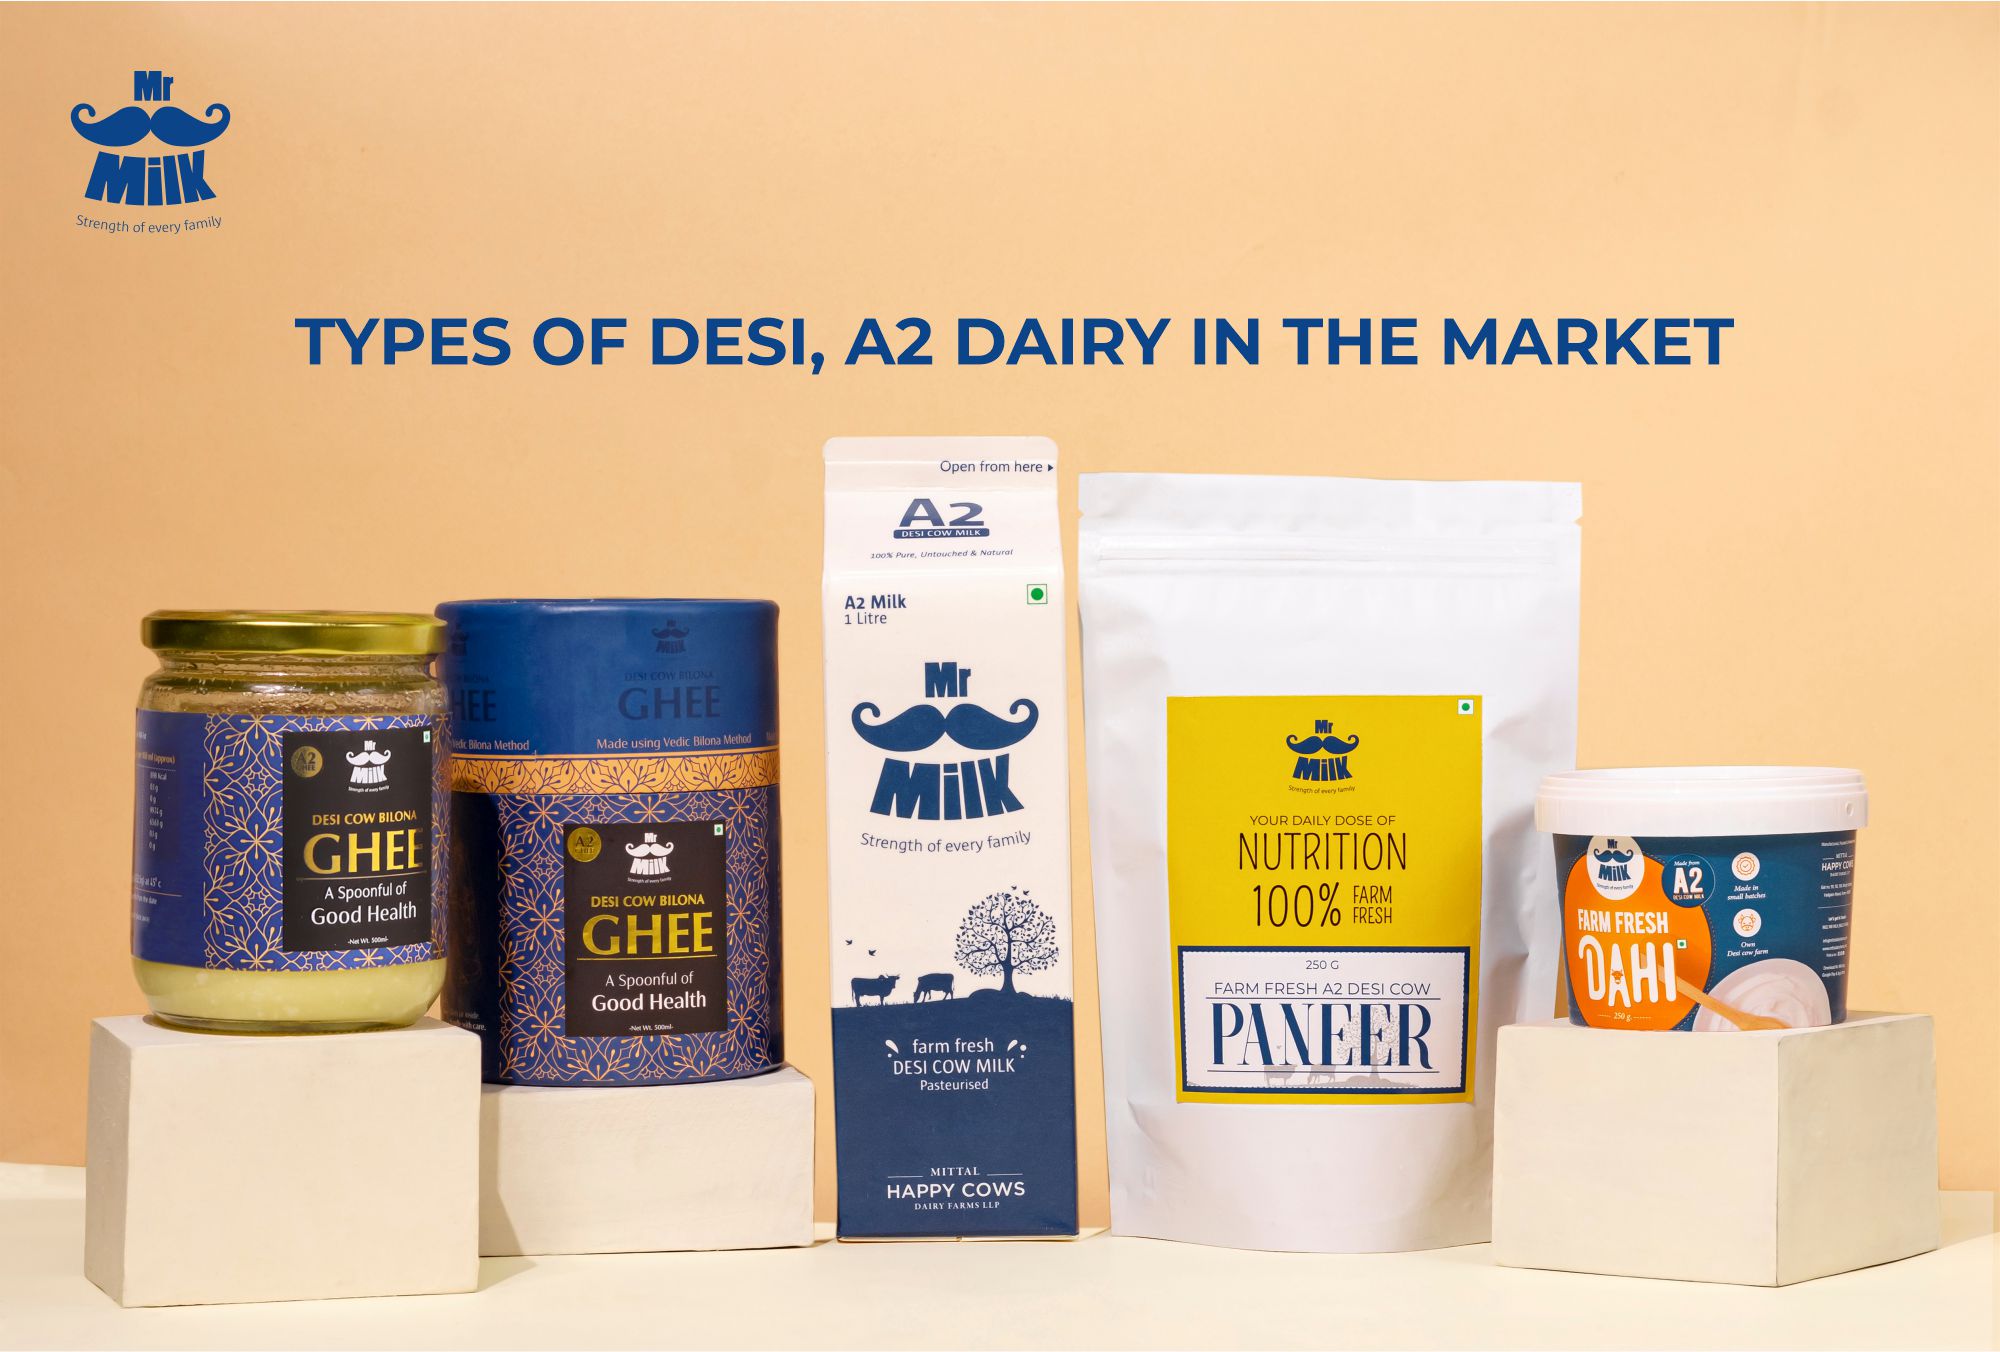 Types Of Desi, A2 Dairy Products in the Market In Pune.